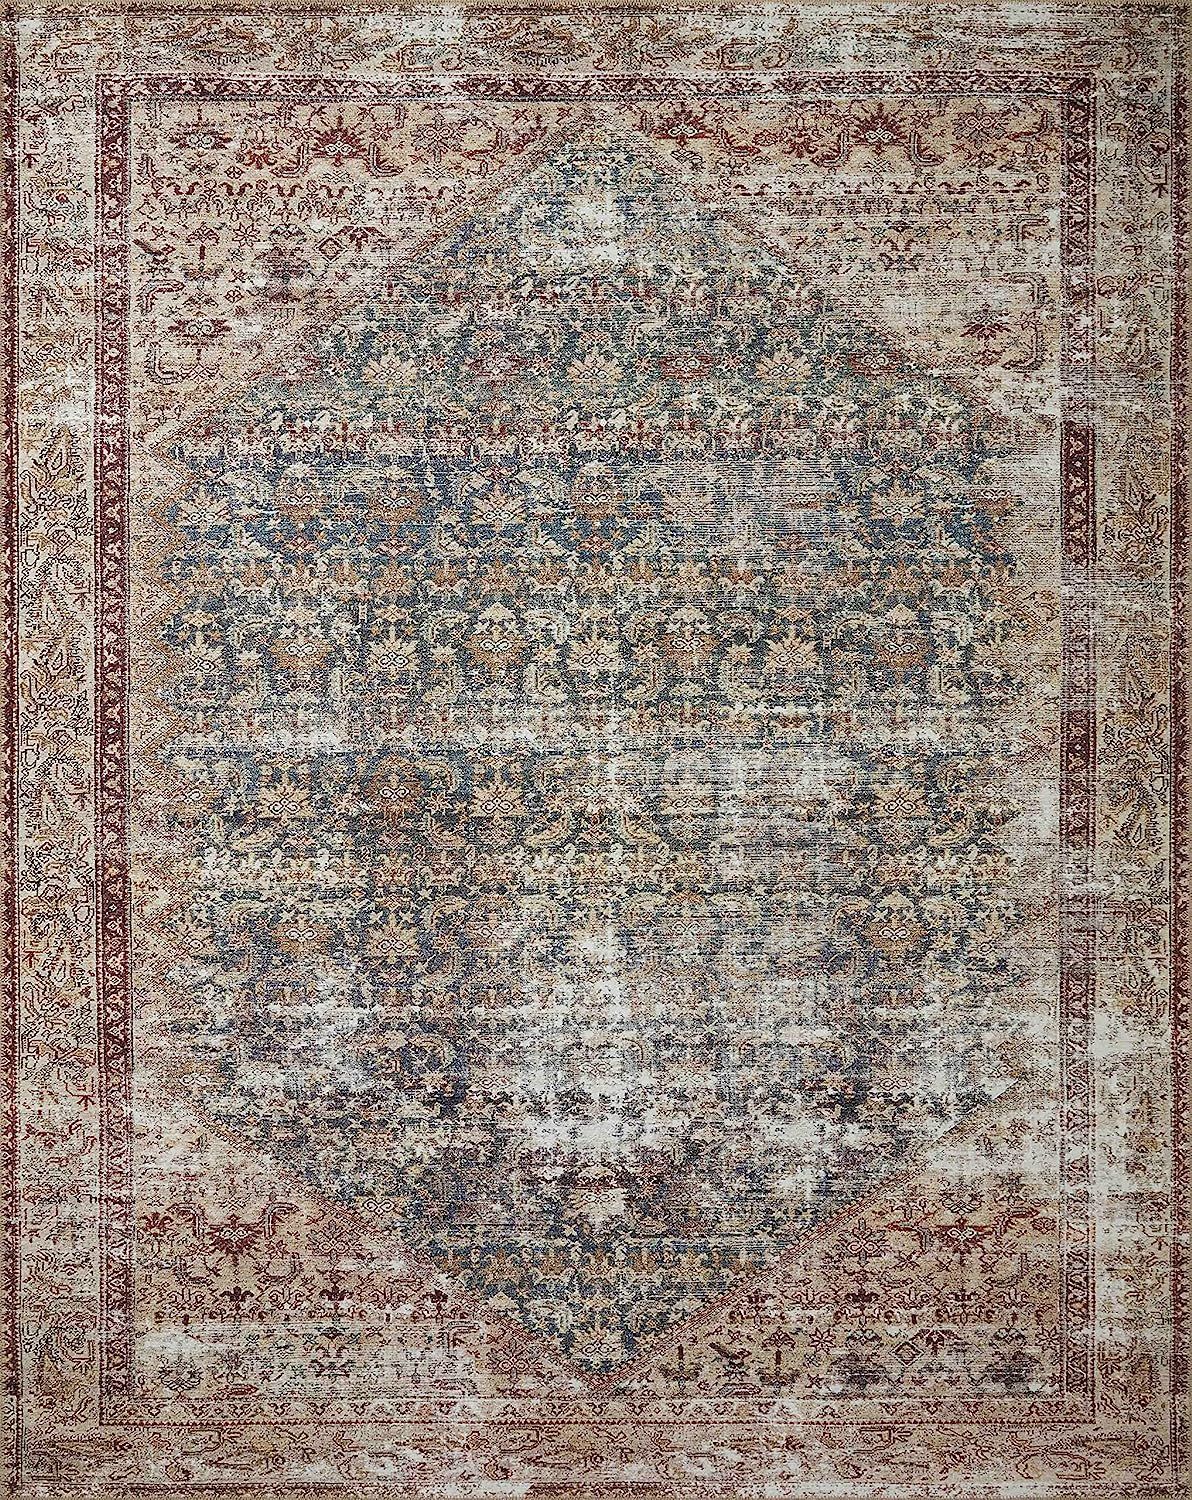 Amber Lewis x Loloi Georgie Collection GER-04 Teal / Antique 7'6" x 9'6" Area Rug | Amazon (US)